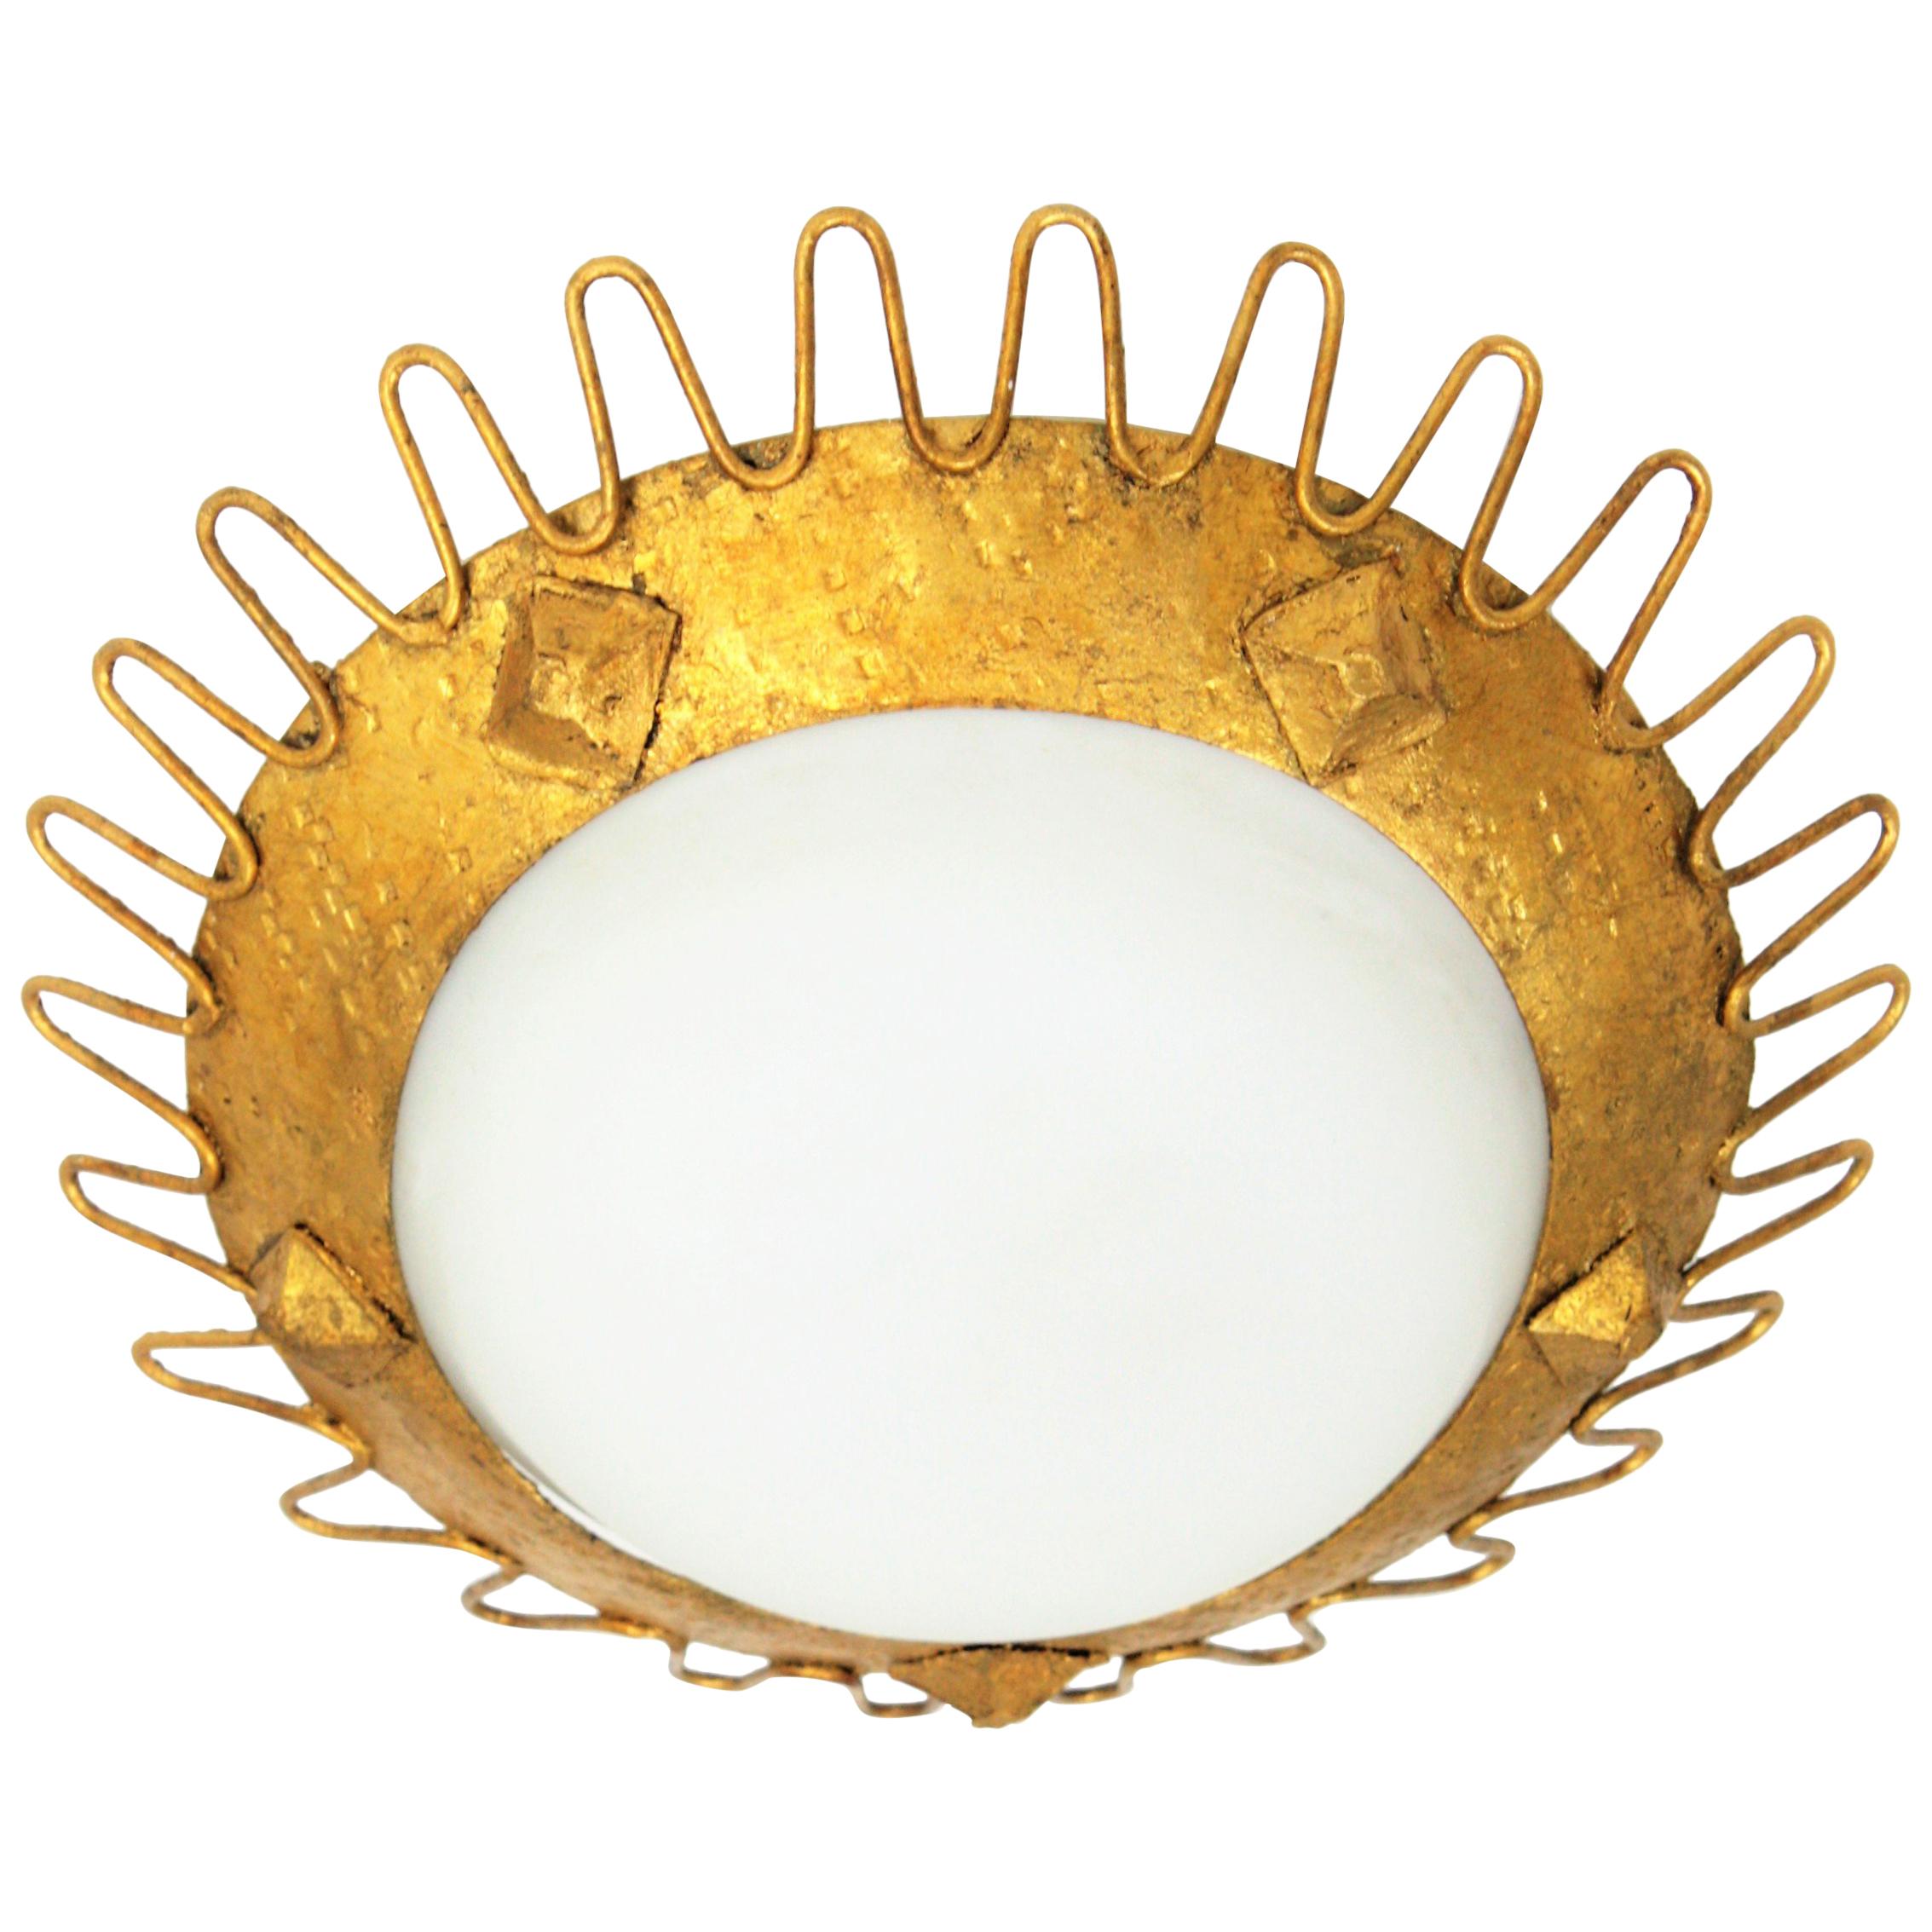 A Brutalist style hand-hammered iron and opaline glass sunburst flush mount manufactured at the Mid-century Modern period. This light fixture has a  looped edge, rhombus decoration on the frame and gold leaf finish. In the manner of Jean Royère.